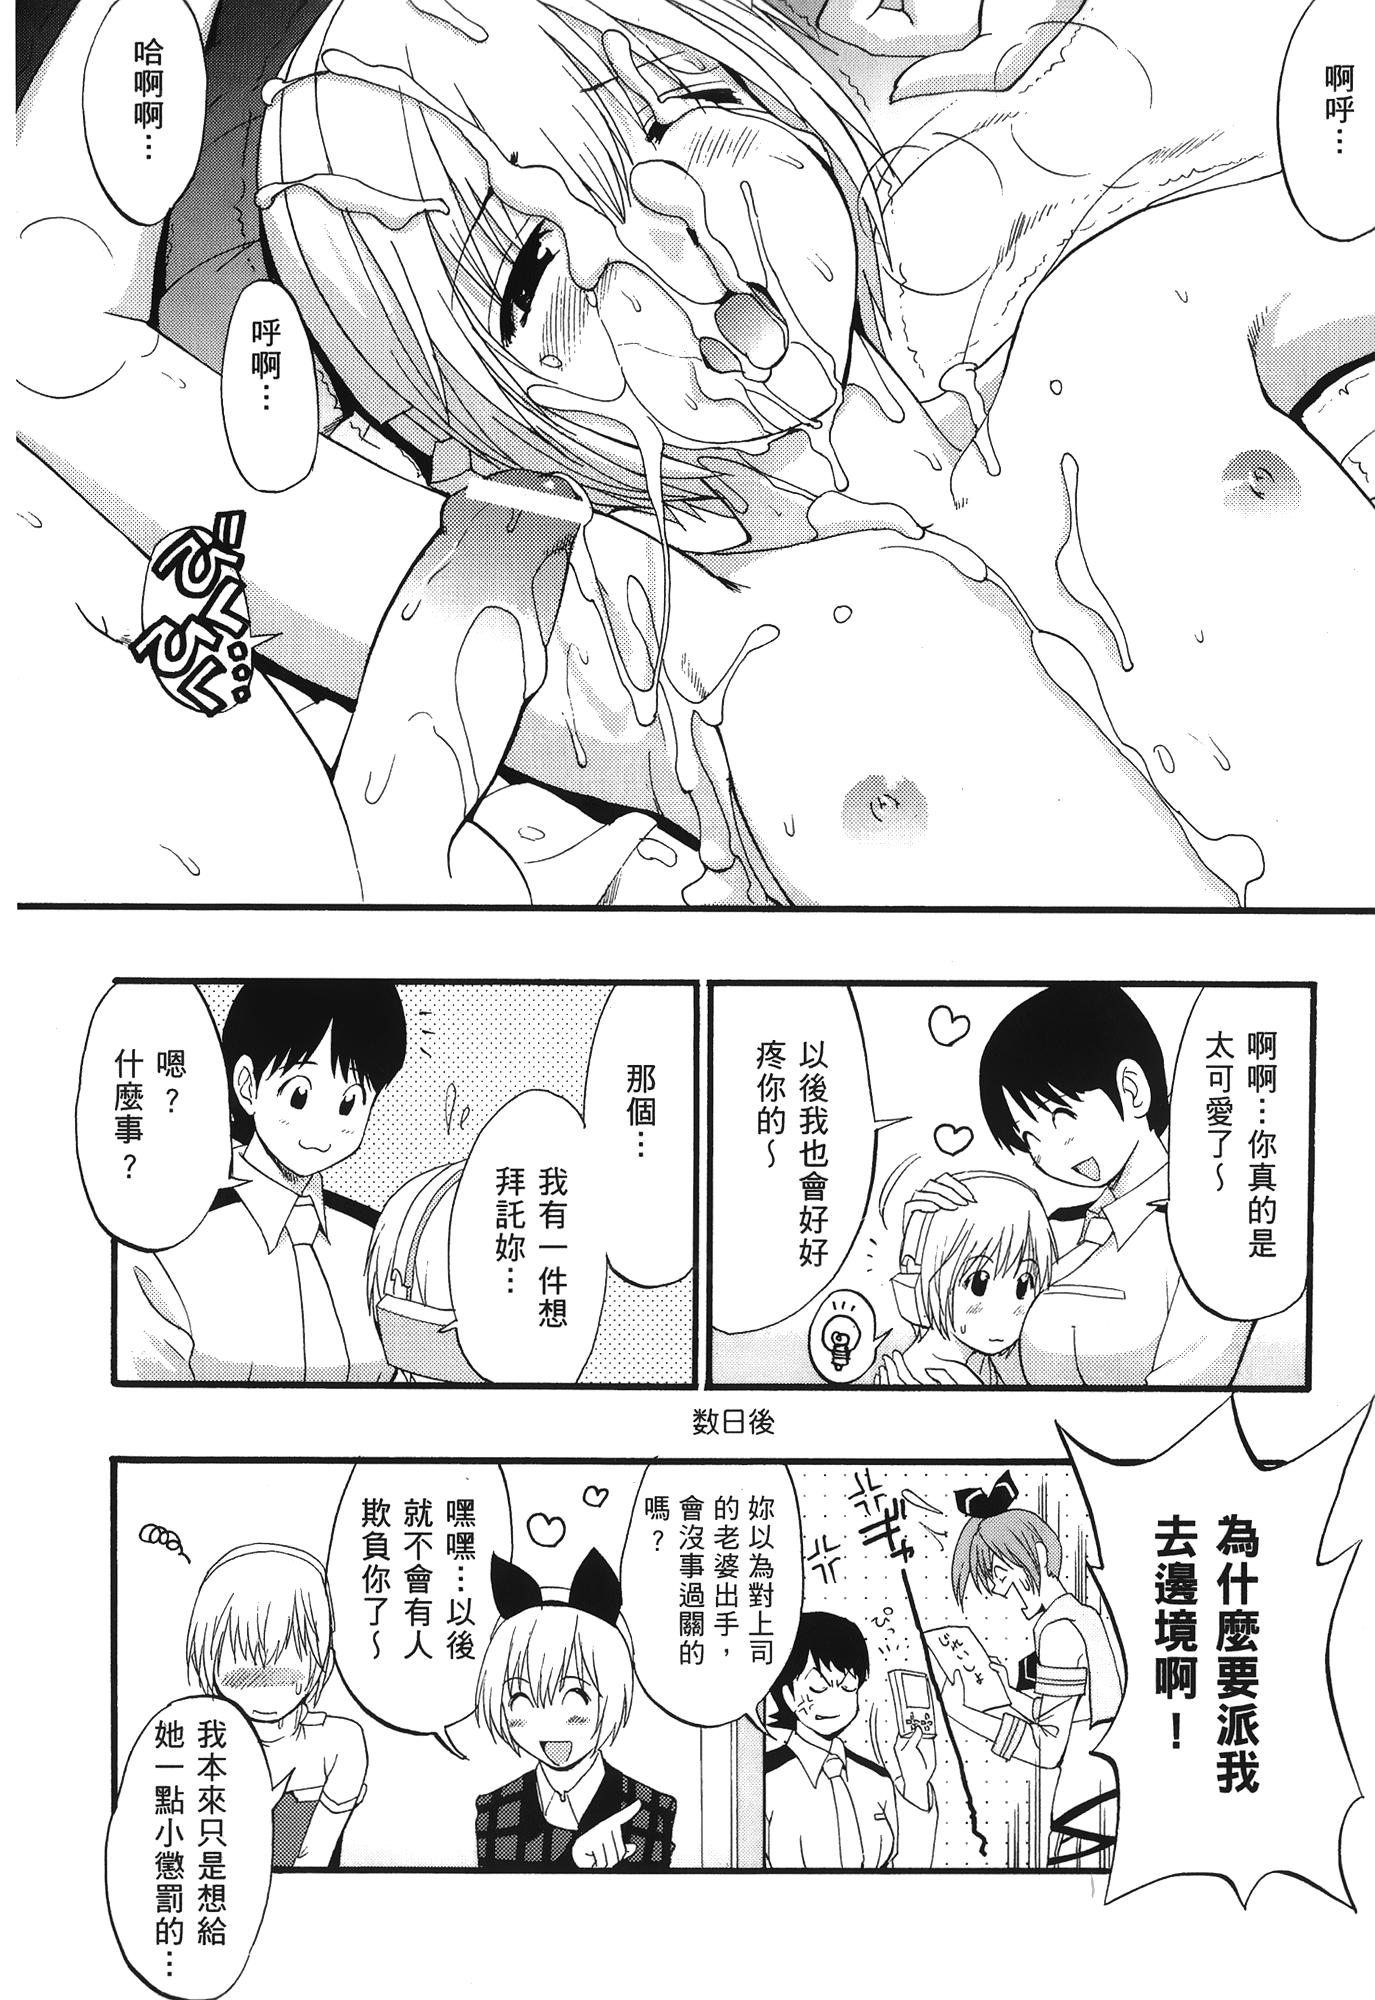 Couples Fucking [Saigado] THE YURI & FRIENDS 6 (King of Fighters) | 武鬥美少女 [Chinese] - King of fighters Gay Solo - Page 159